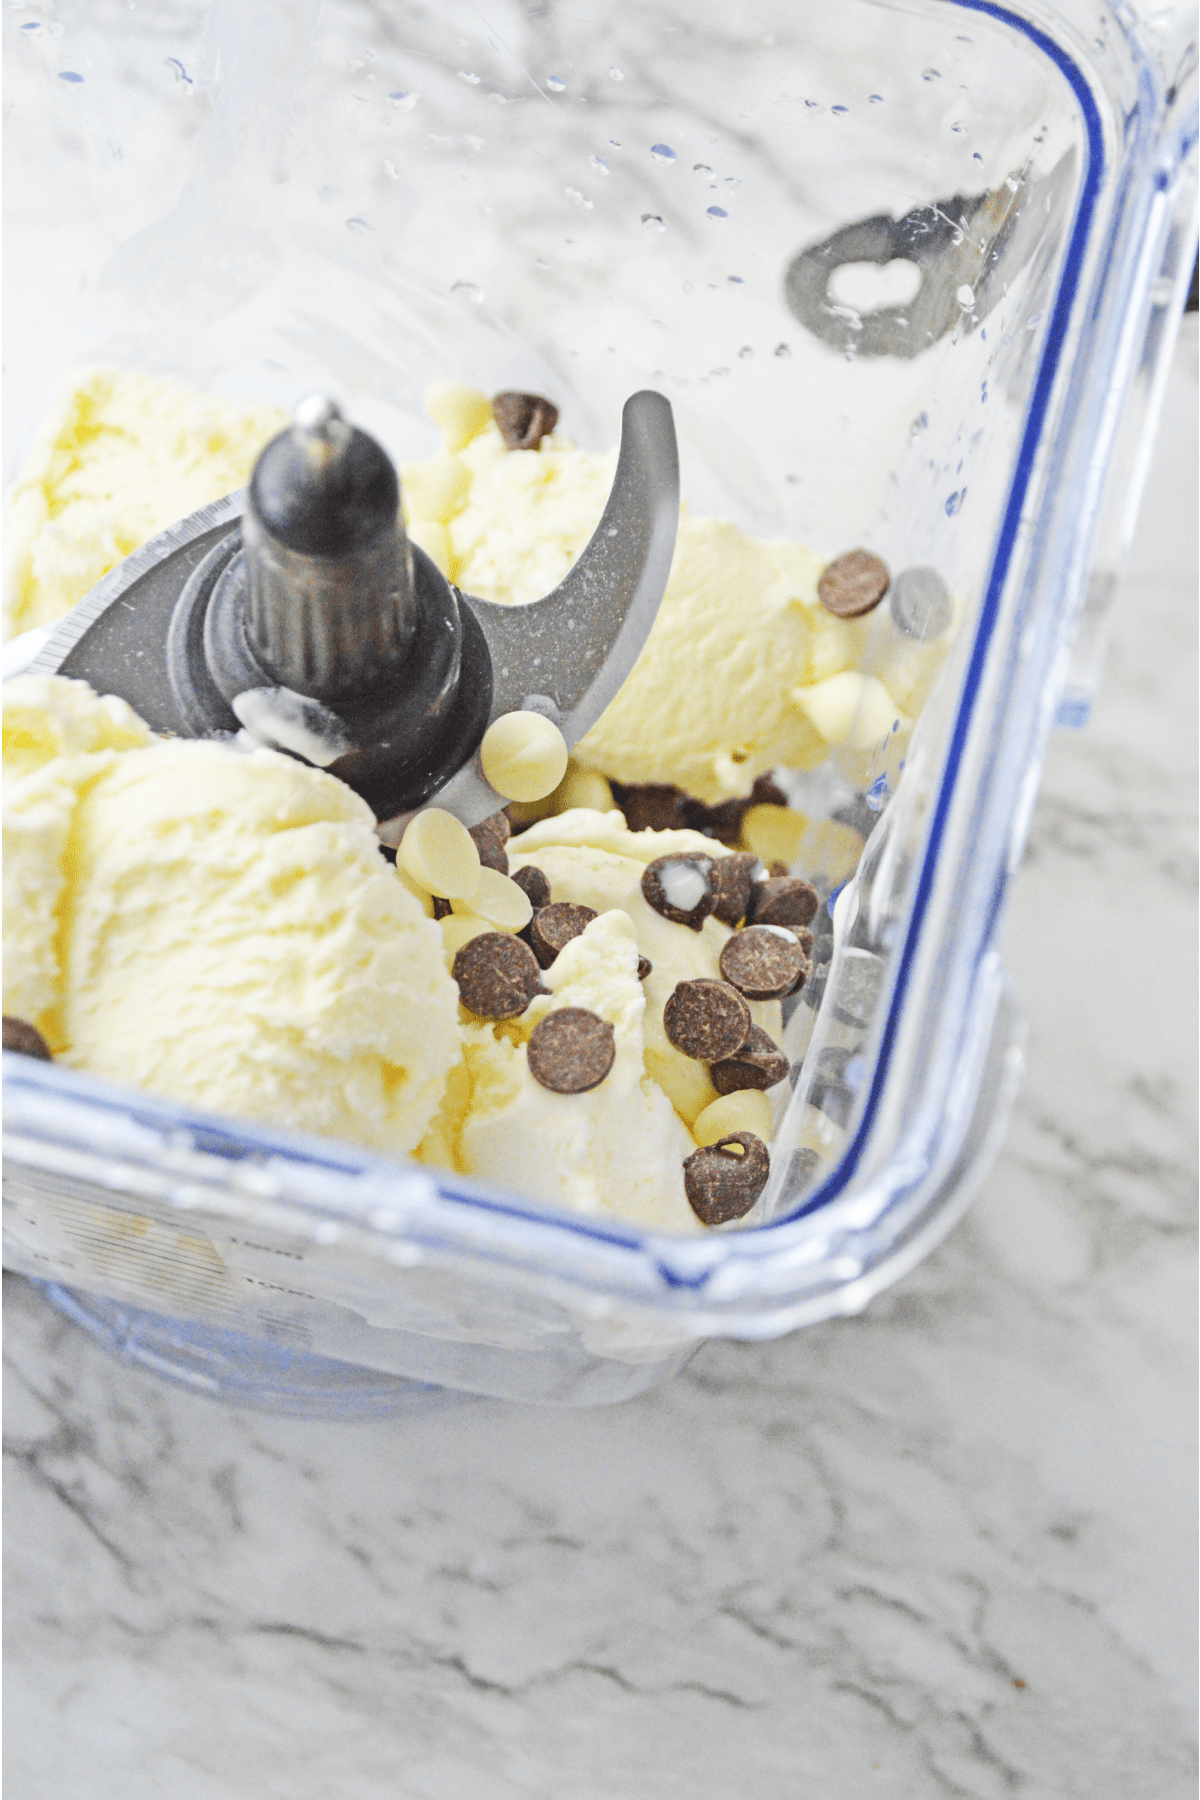 Chocolate chips and ice cream in blender